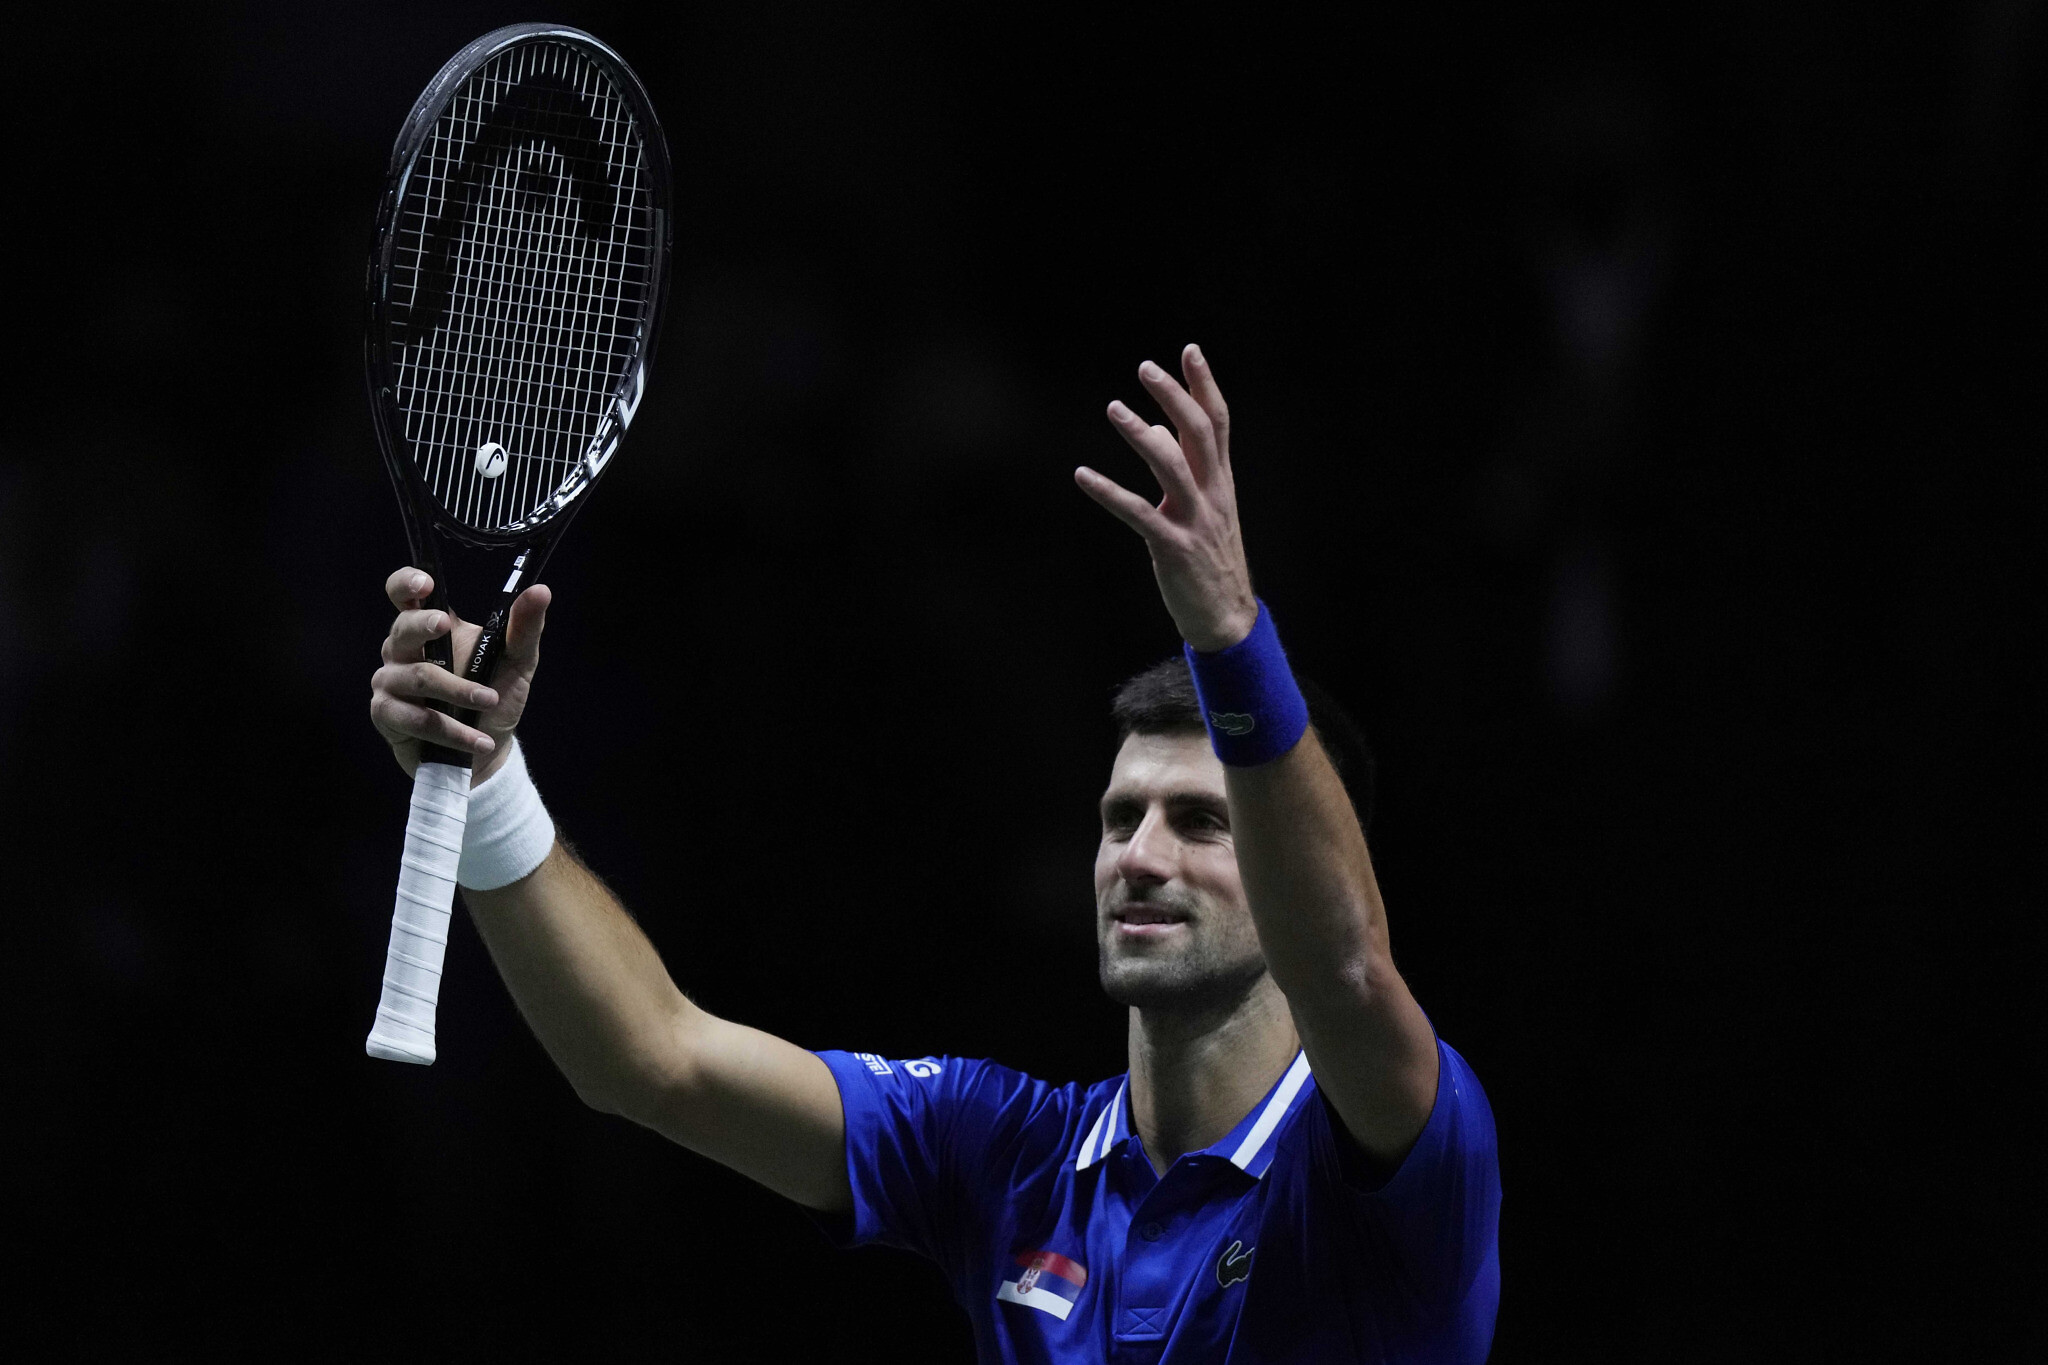 Novak Djokovic won't compete in two U.S. tournaments due to COVID